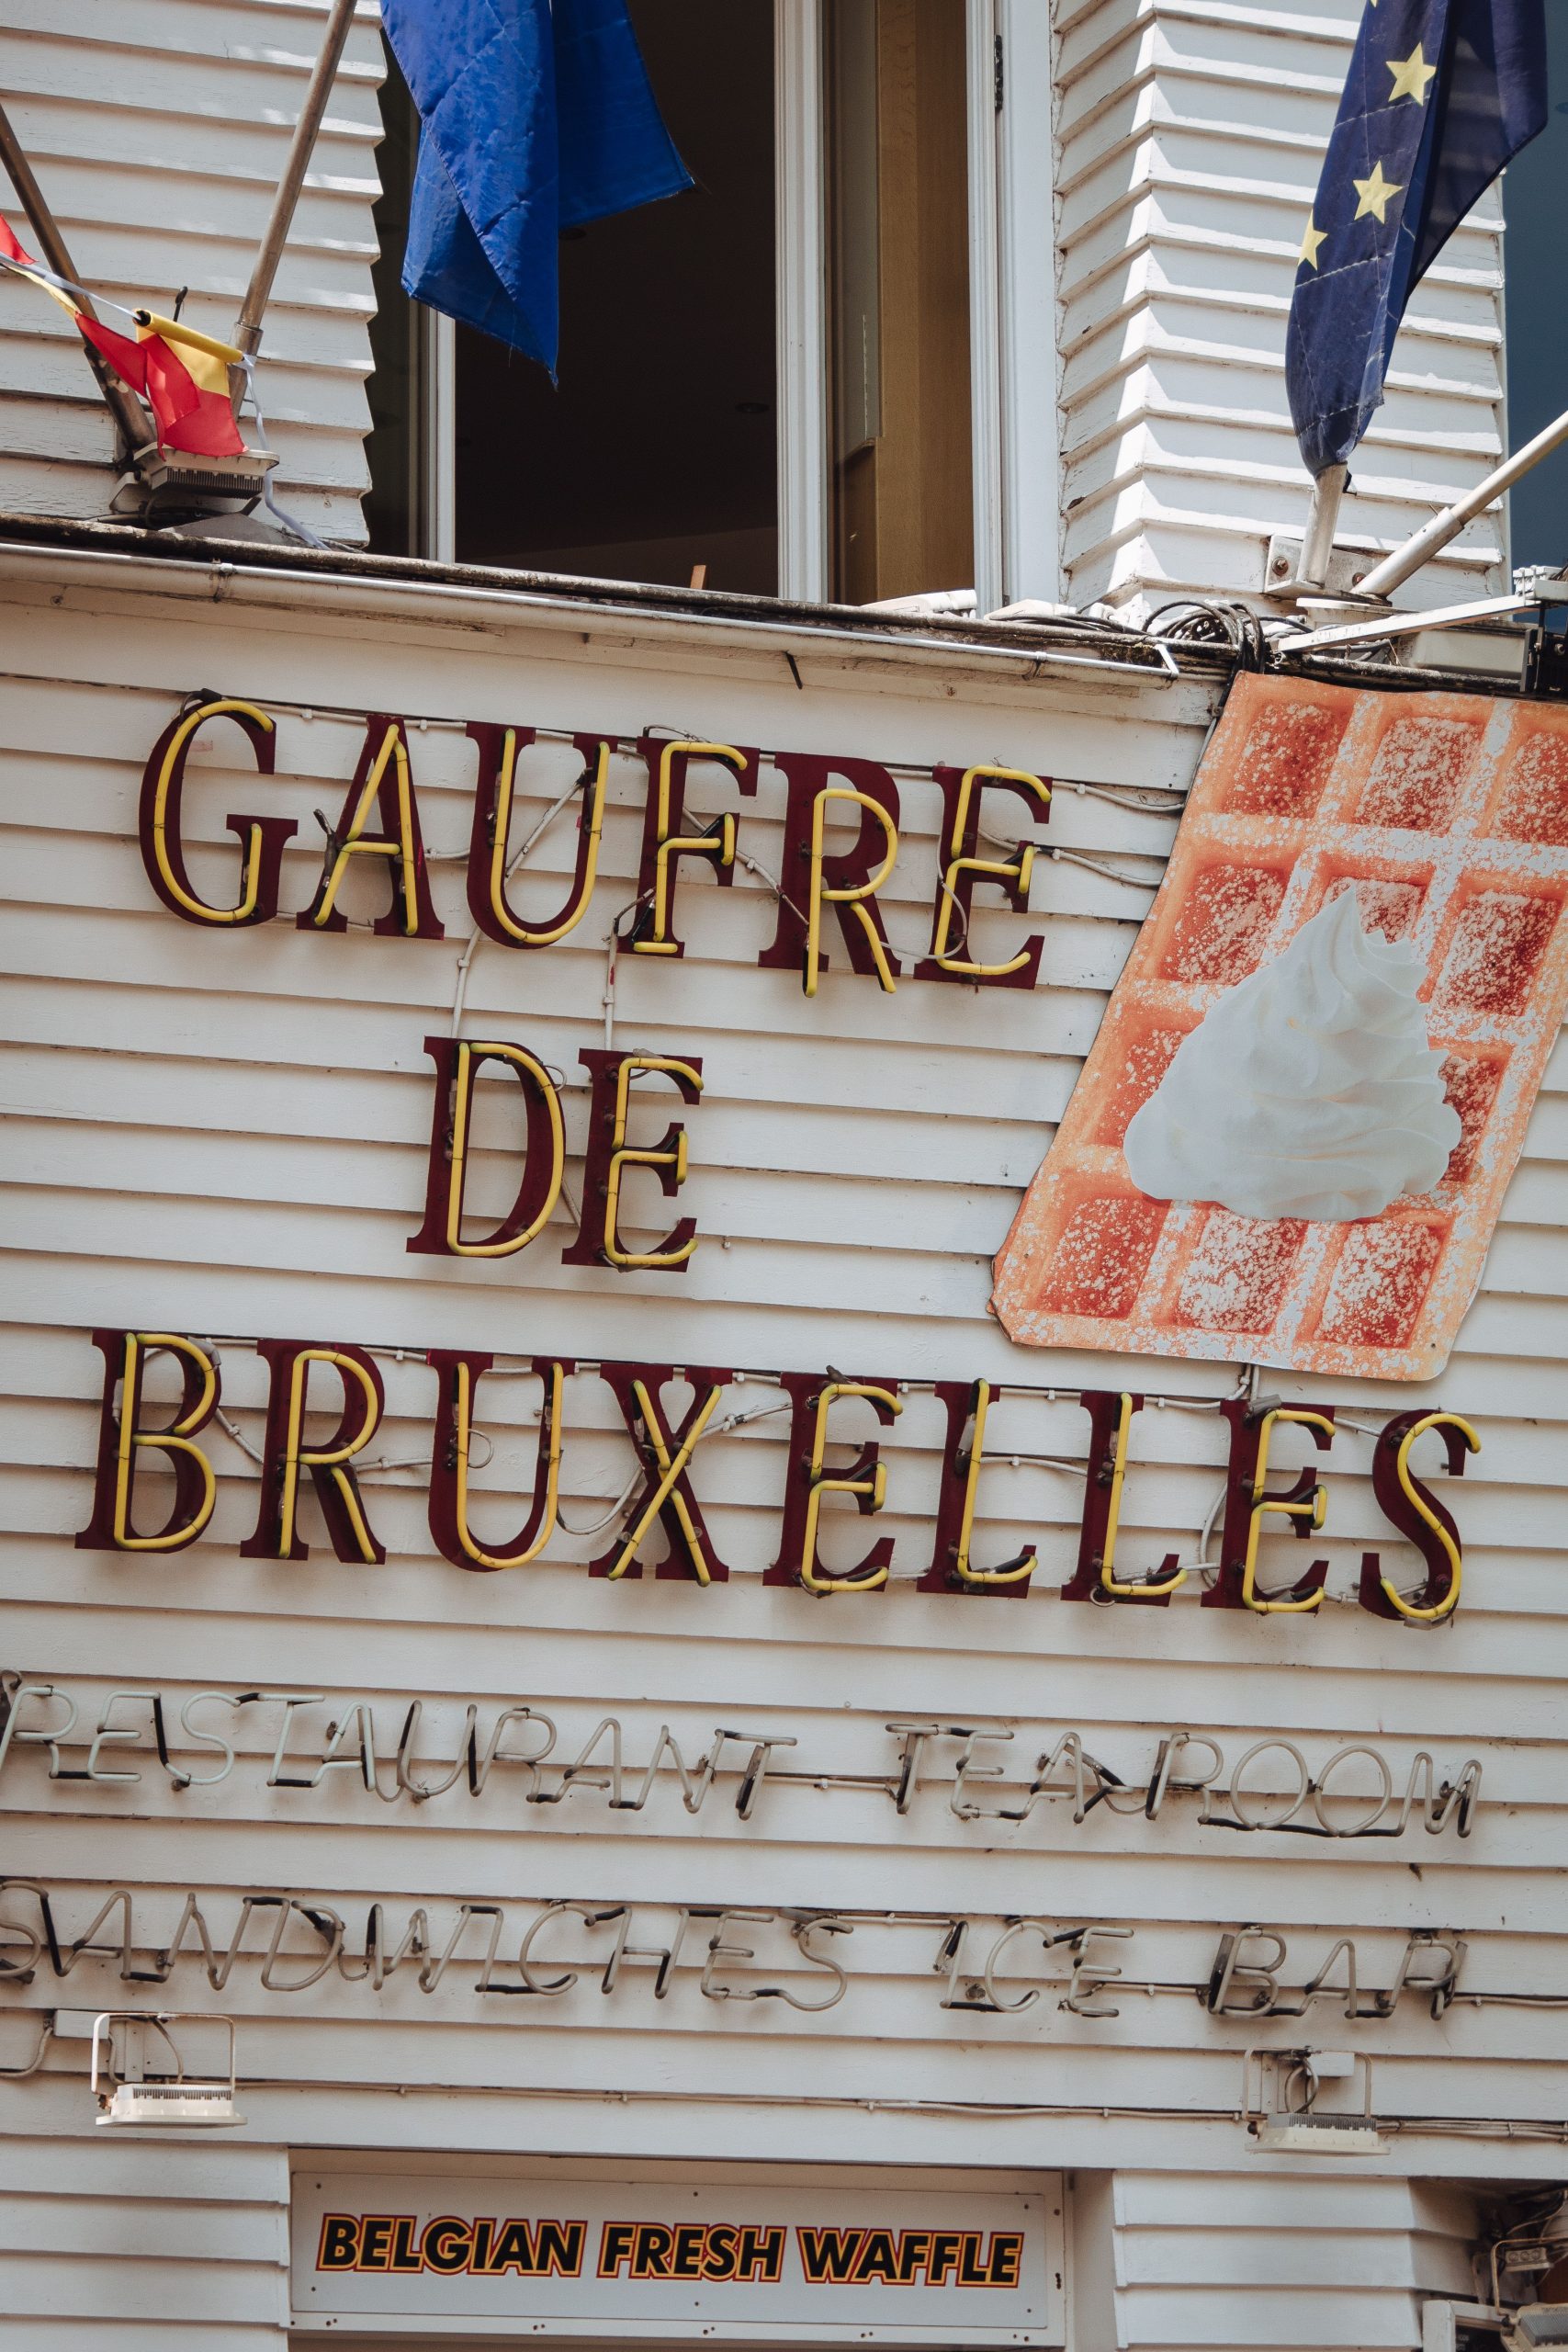 Set the taste buds tingling with the best Belgian waffles in Brussels